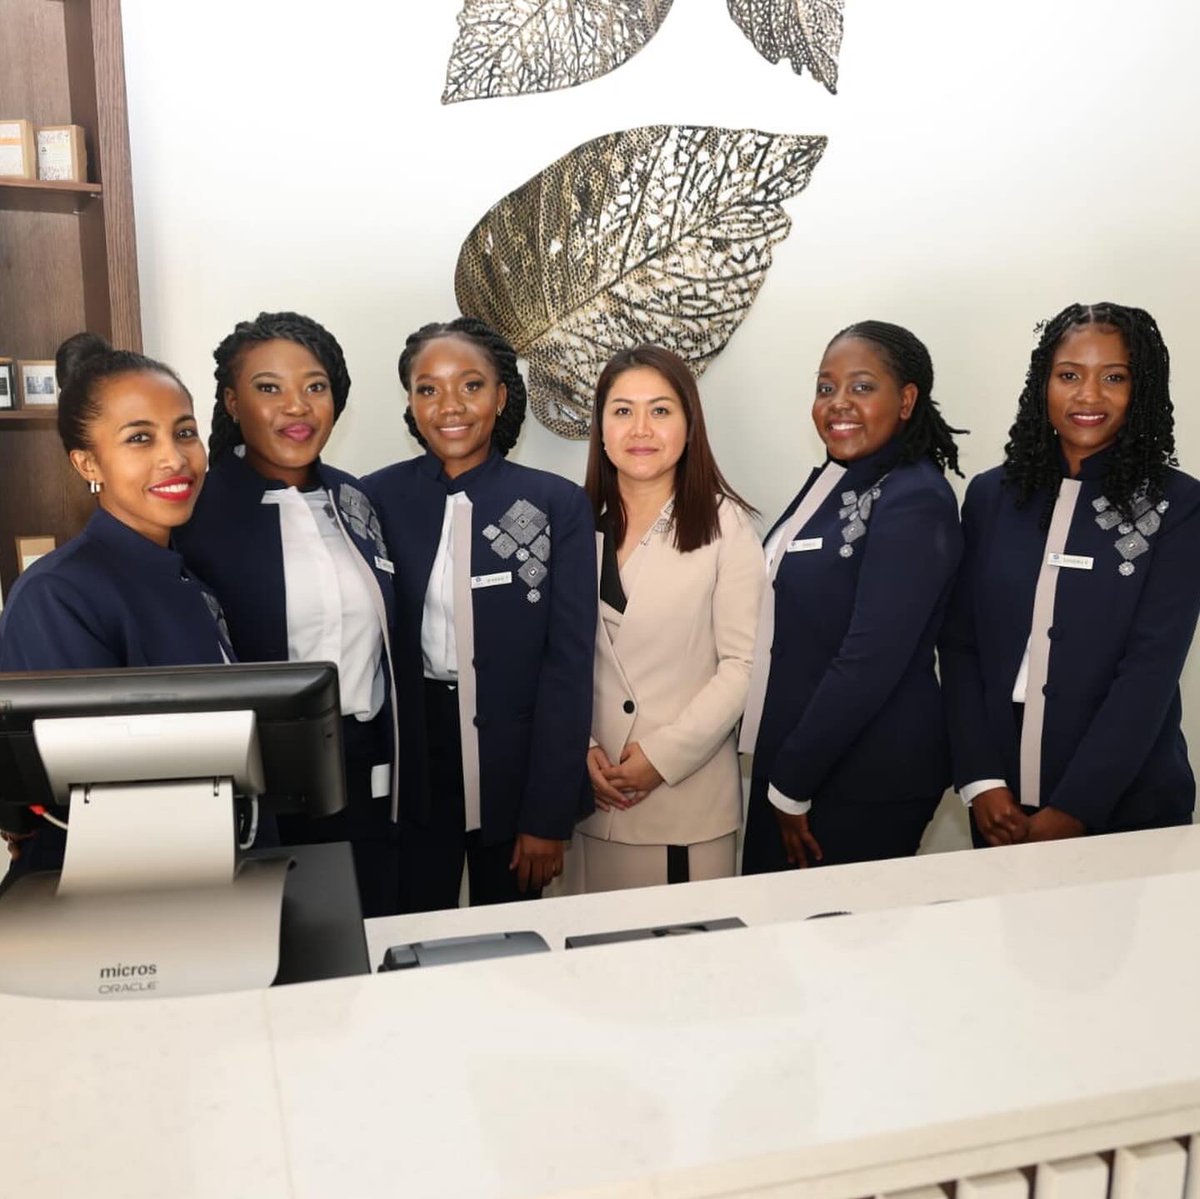 Delighted to officiate at the grand opening of the The Meikles, Hyatt Regency Harare. This investment is another great example of Zimbabwe’s growth and development. Congratulations to ASB Hospitality for bringing the prestigious Hyatt brand to our country 🇿🇼